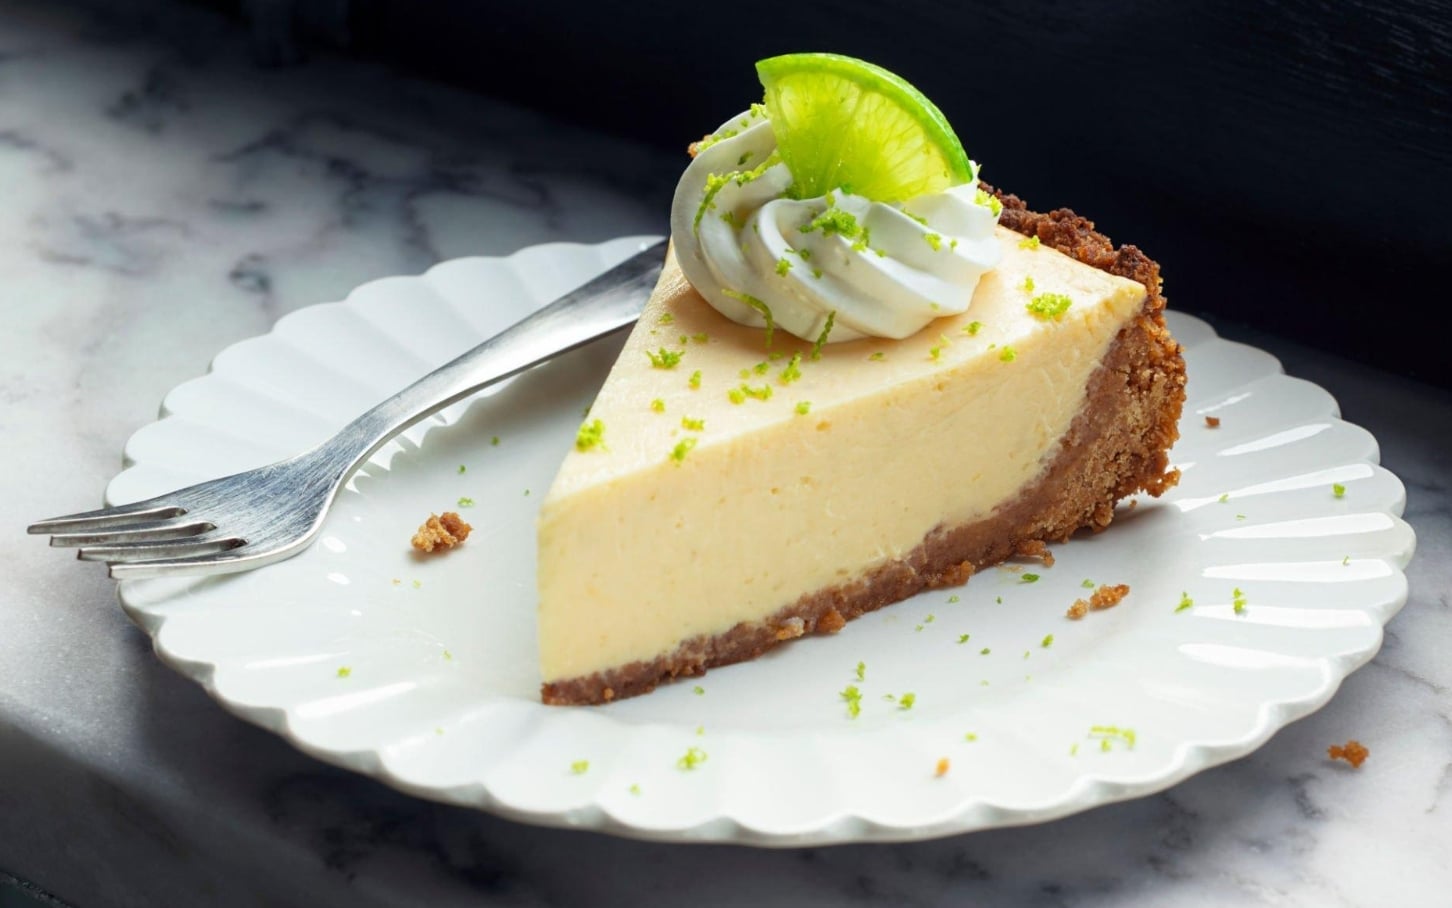 What Makes Key Lime Pie So Special?